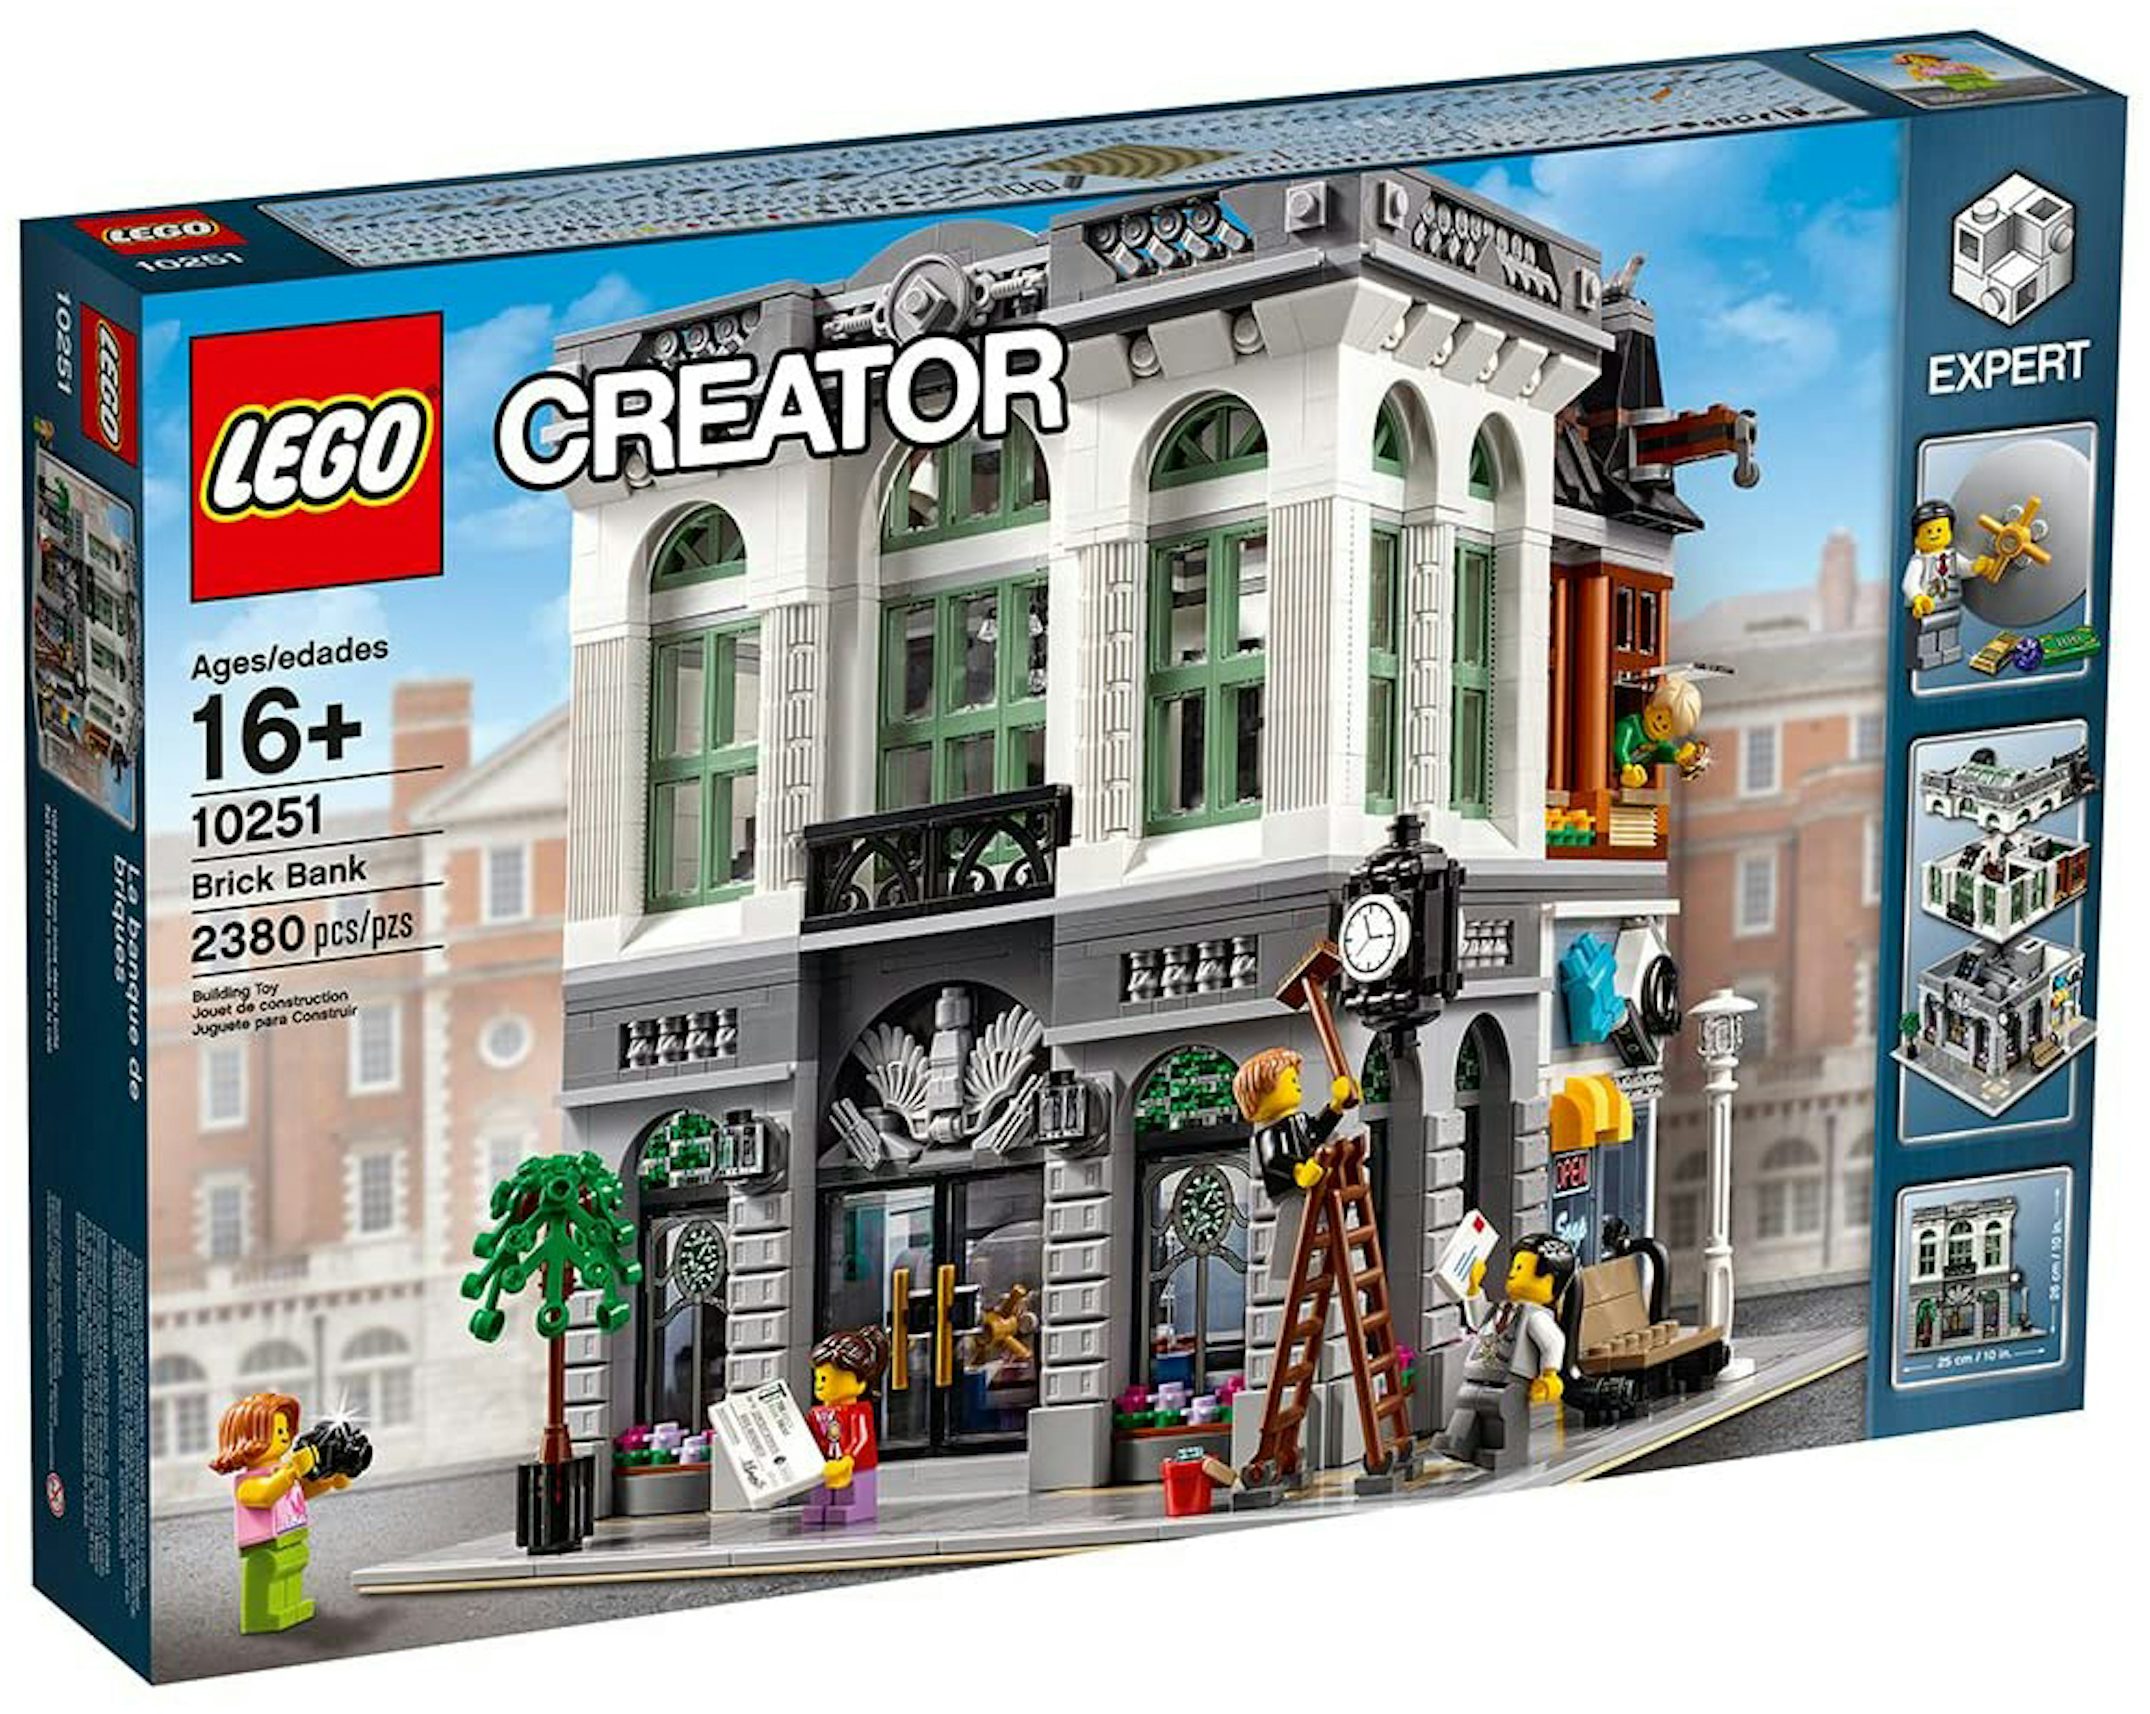 What Can Luxury Brands like Louis Vuitton Learn from Lego?